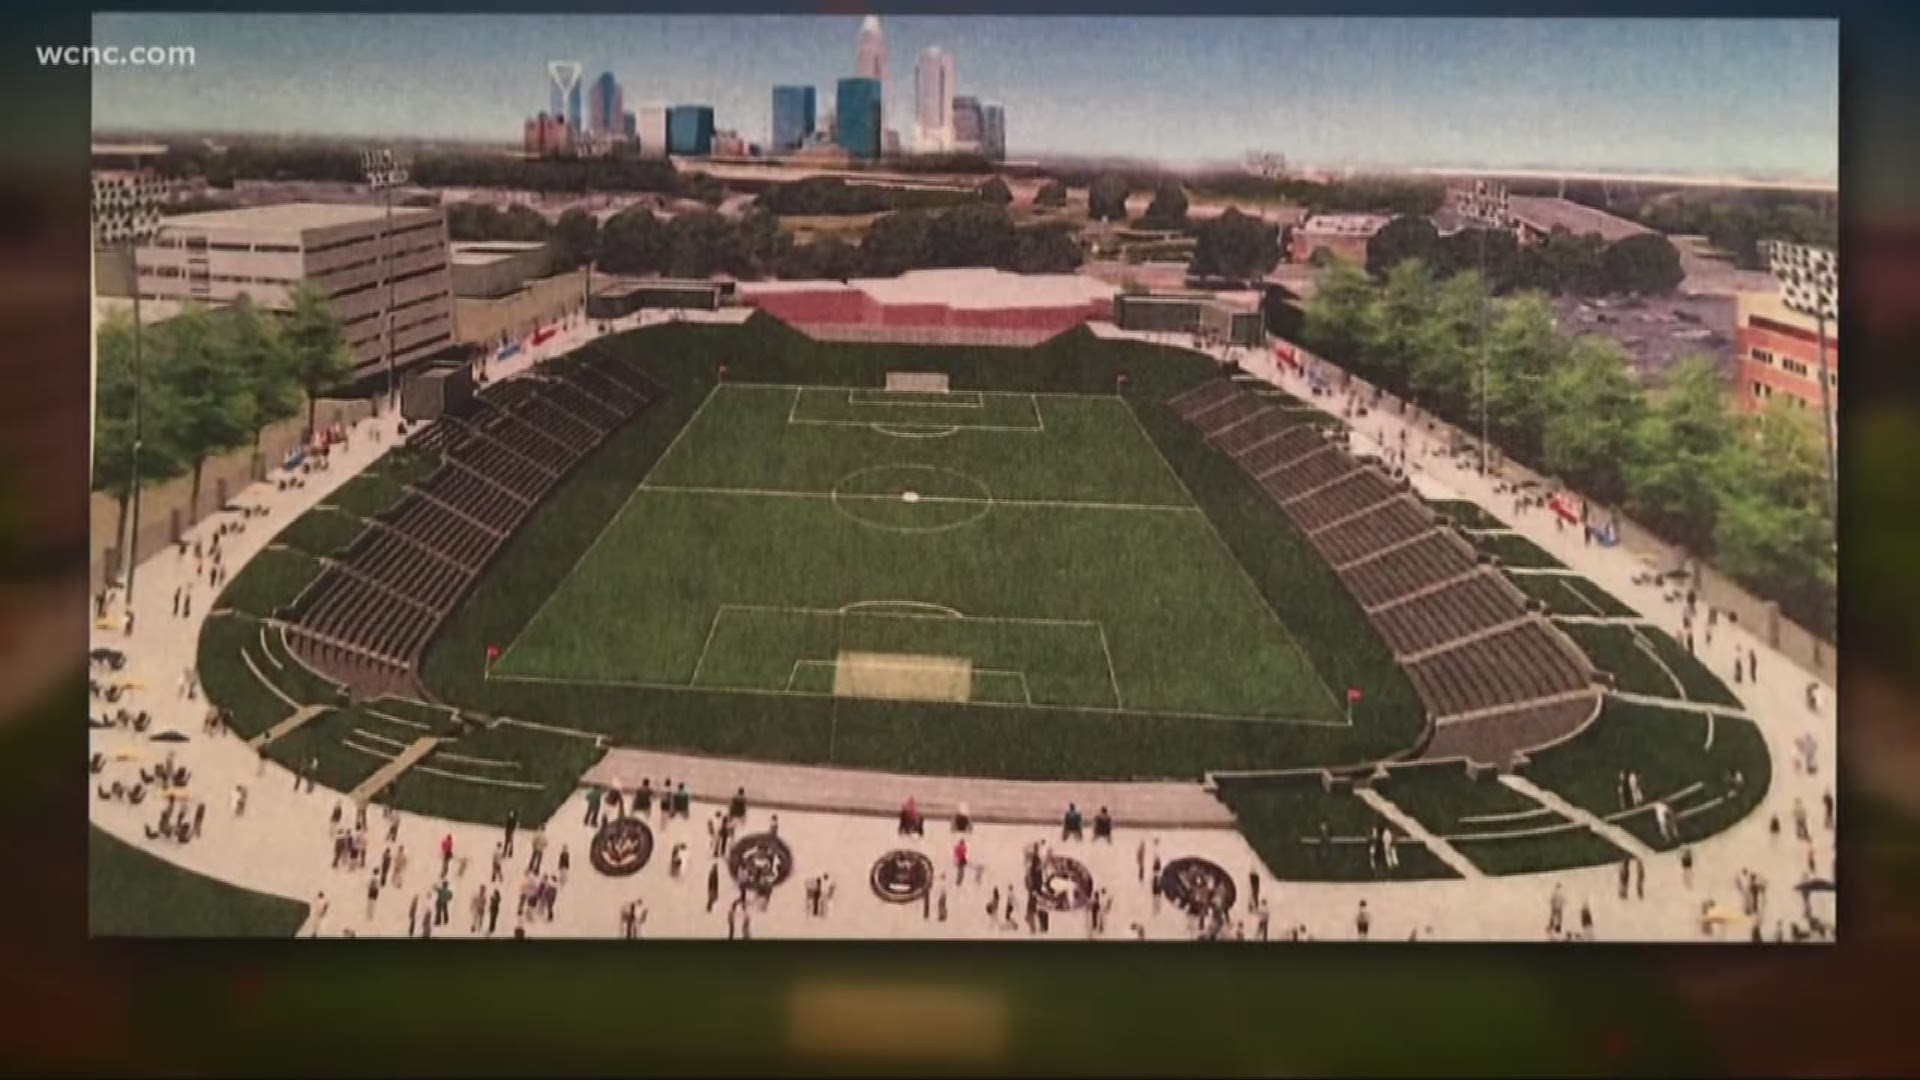 Mecklenburg County's Board of Commissioners approved a plan to use tens of millions of taxpayer dollars to renovate a local stadium.